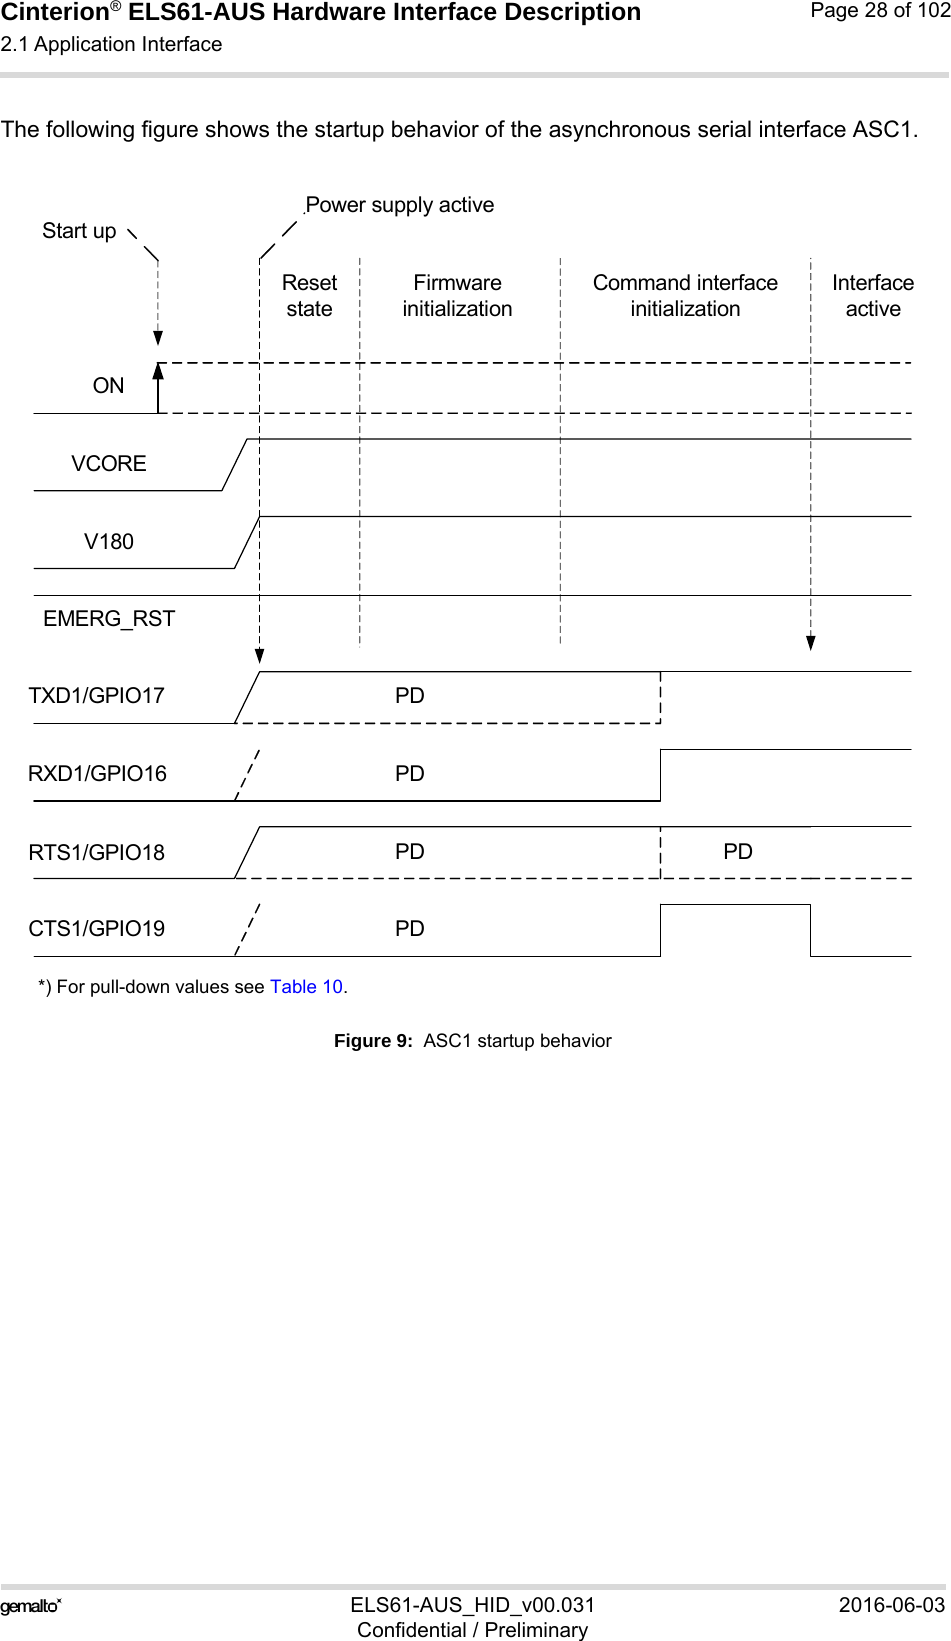 Cinterion® ELS61-AUS Hardware Interface Description2.1 Application Interface52ELS61-AUS_HID_v00.031 2016-06-03Confidential / PreliminaryPage 28 of 102The following figure shows the startup behavior of the asynchronous serial interface ASC1.*) For pull-down values see Table 10.Figure 9:  ASC1 startup behaviorTXD1/GPIO17RXD1/GPIO16RTS1/GPIO18CTS1/GPIO19ONEMERG_RSTPDPDPDPDPower supply activeStart upFirmware initializationCommand interface initializationInterface activeResetstateV180VCOREPD